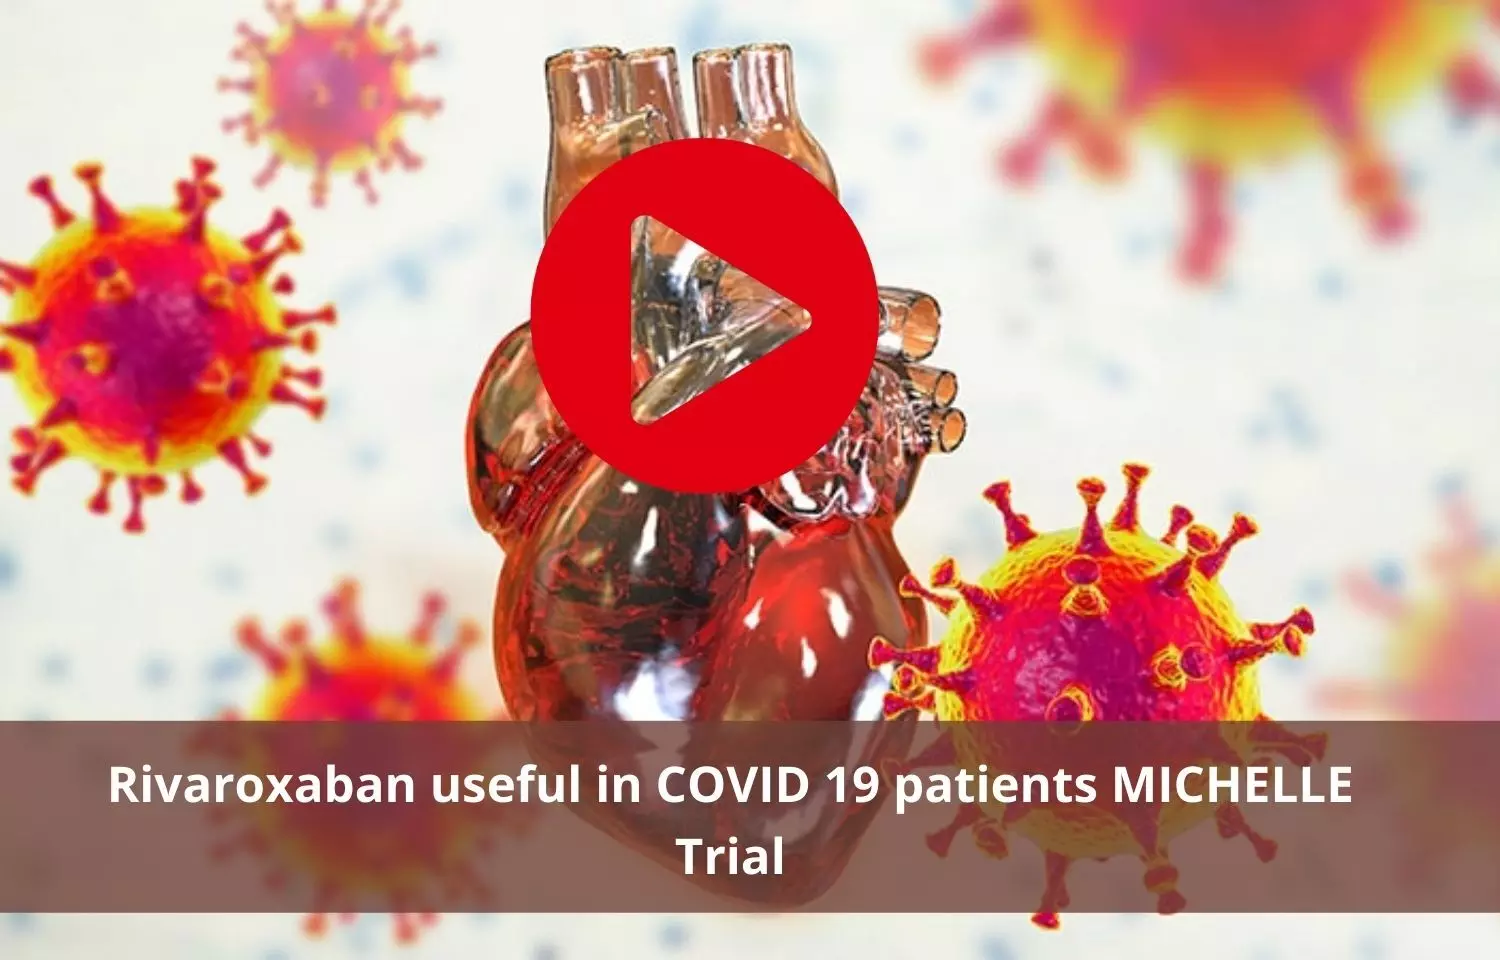 Rivaroxiban effective in treating COVID 19 patients: MICHELLE Trial